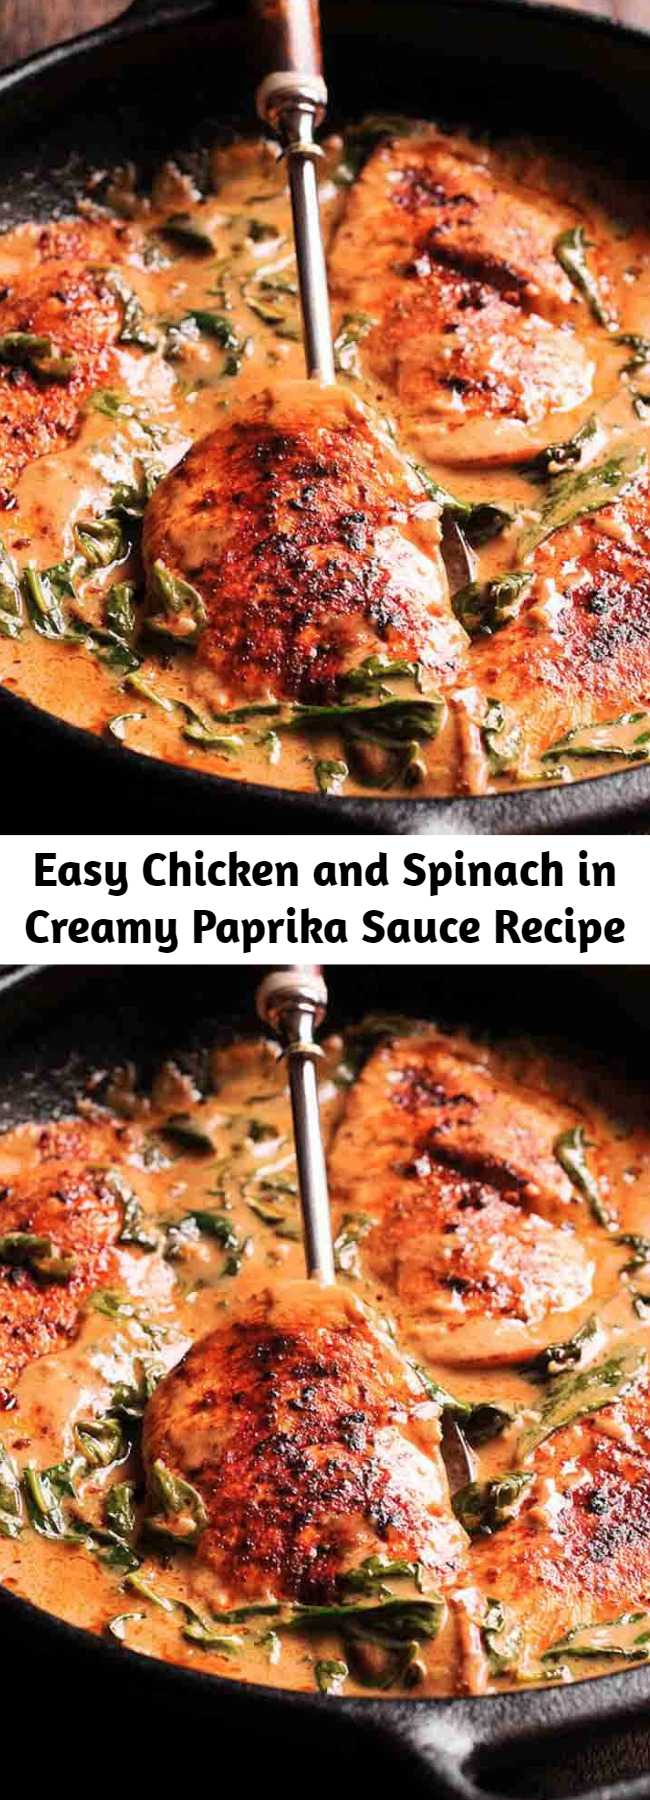 Easy Chicken and Spinach in Creamy Paprika Sauce Recipe - Chicken and Spinach in Creamy Paprika Sauce is an amazing one-pan dish with an amazing flavor from white wine and mild tang from the fresh lemon juice.